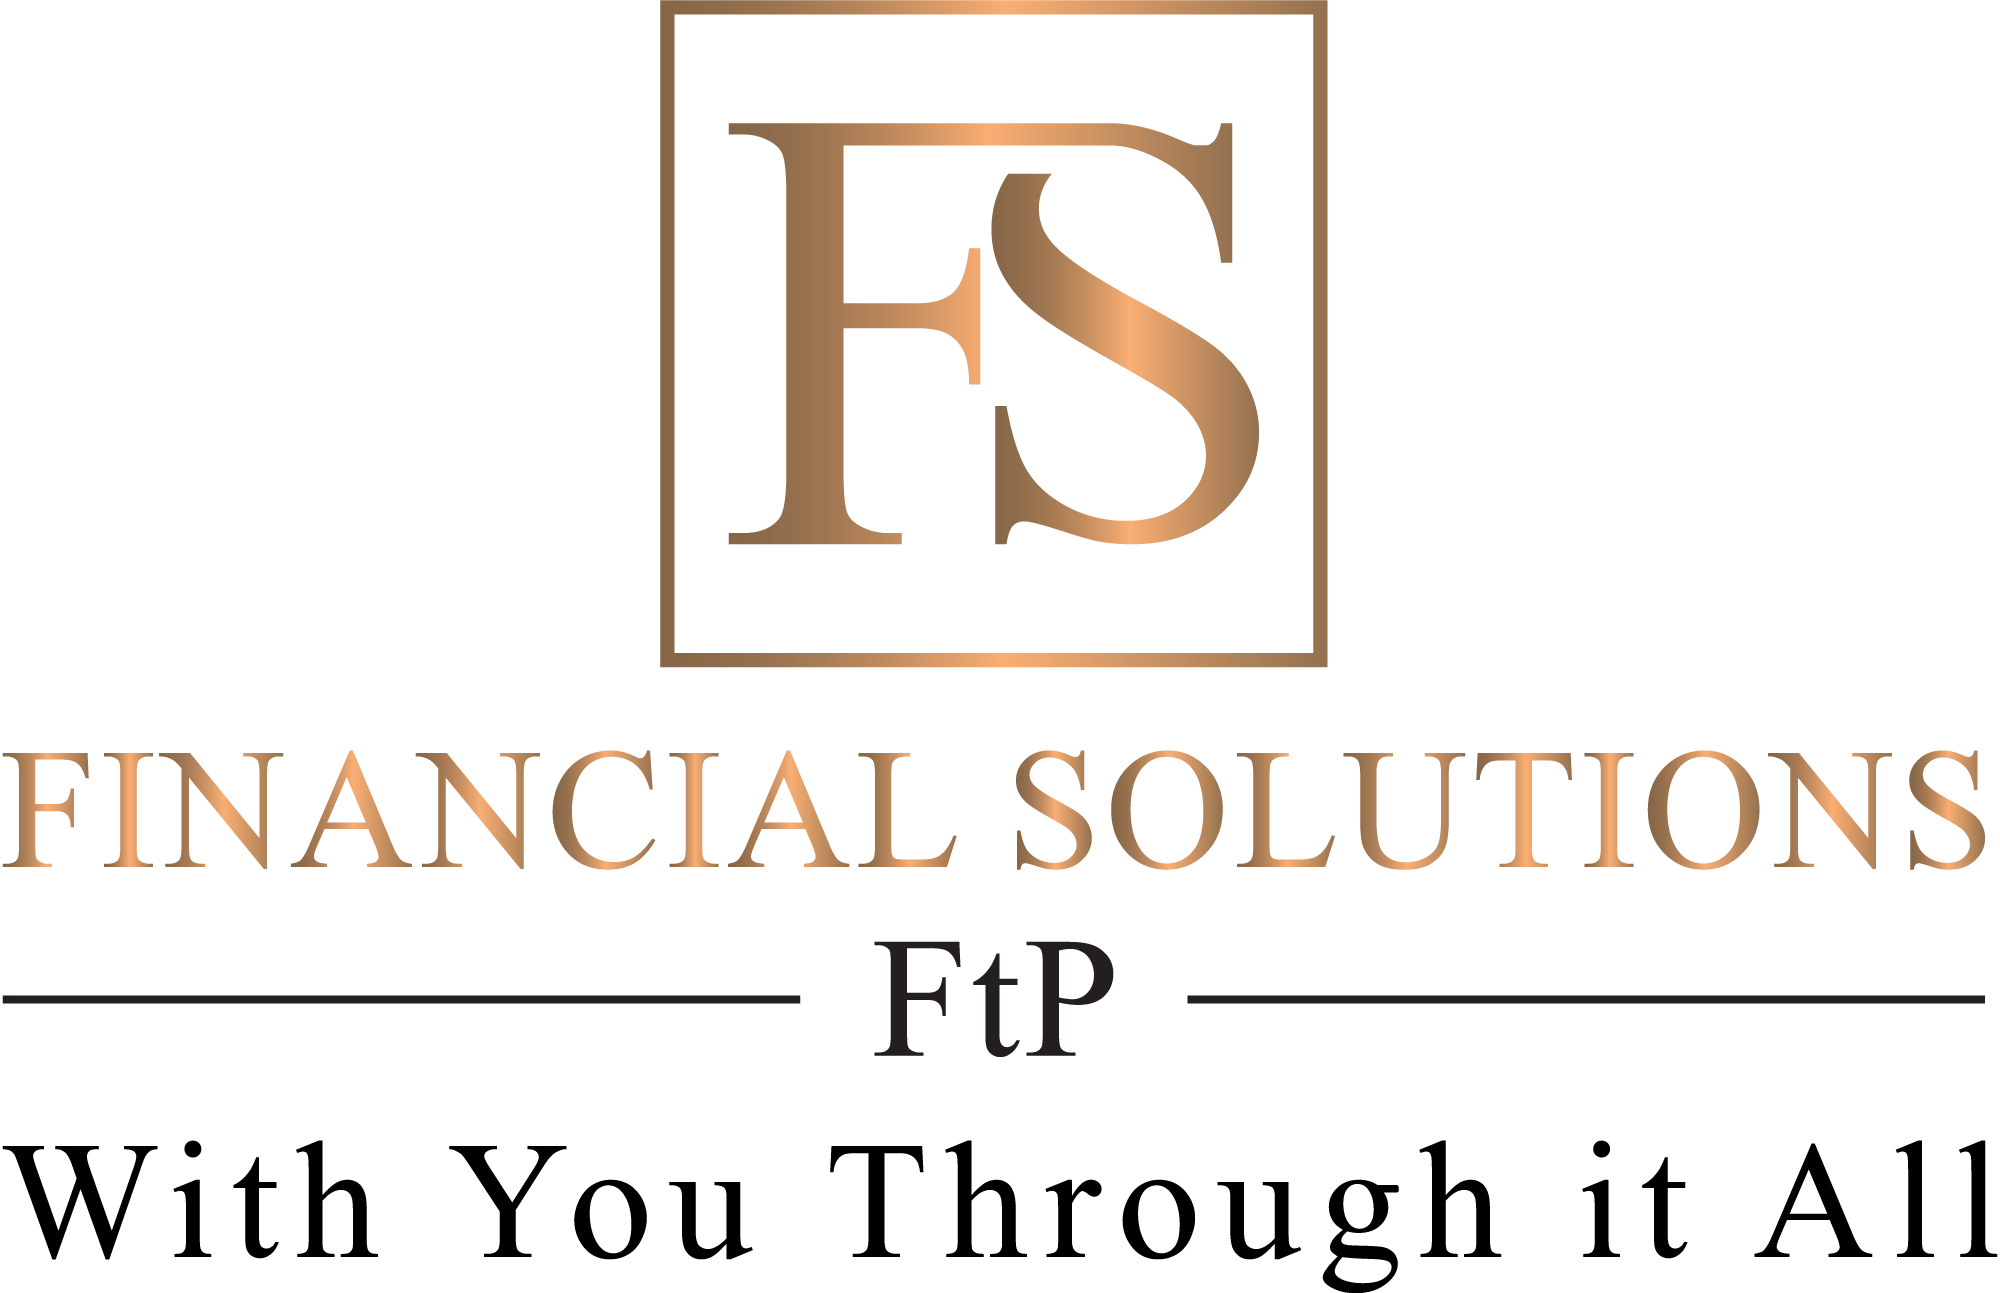 Financial Solutions FtP